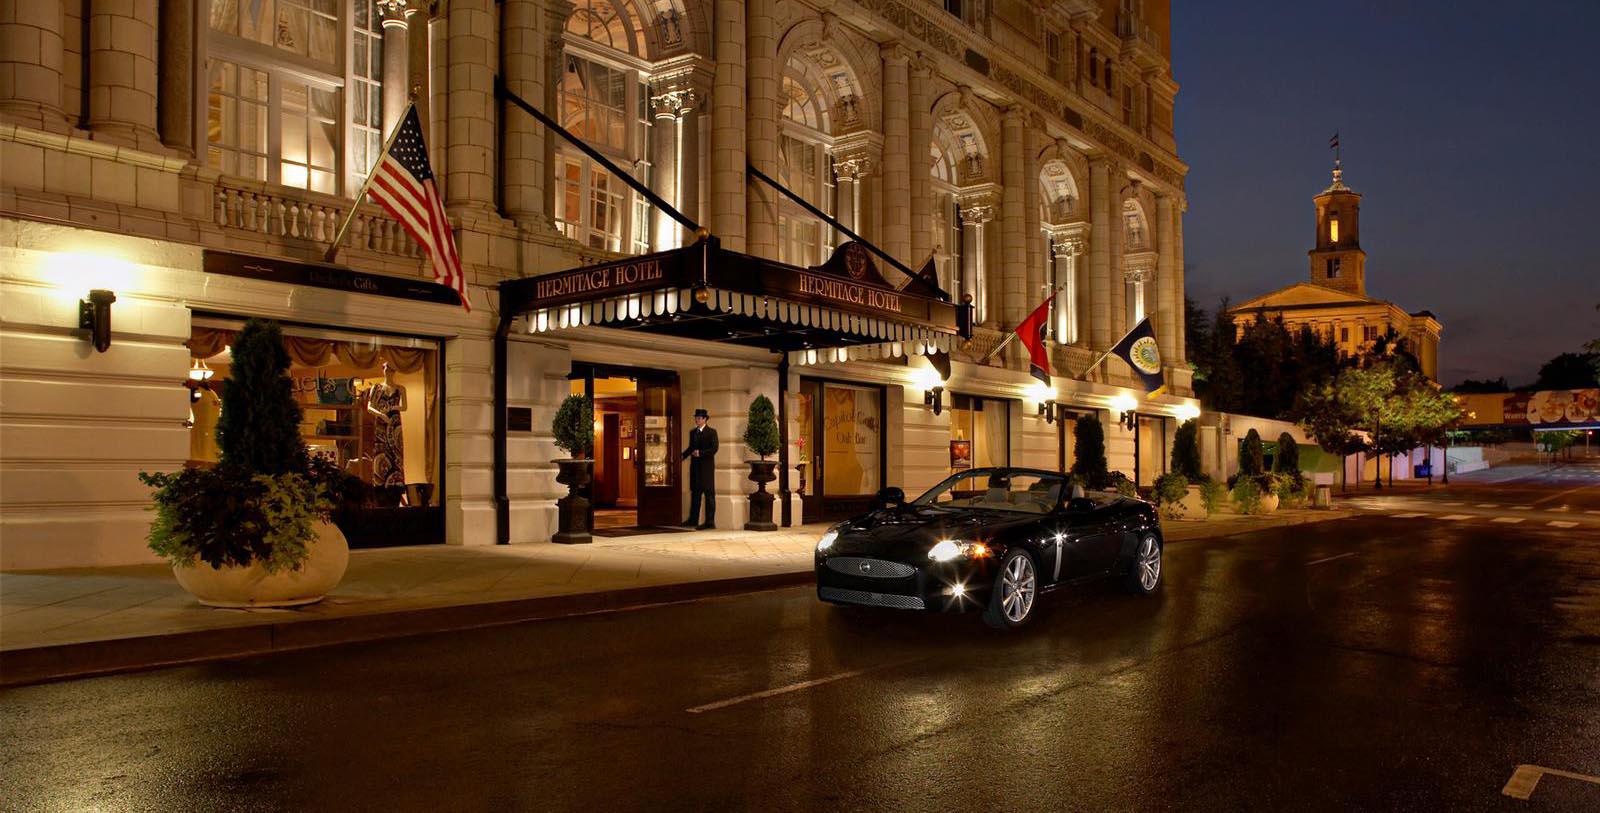 Image of Entrance with Car The Hermitage Hotel, 1910, Member of Historic Hotels of America, in Nashville, Tennessee, Special Offers, Discounted Rates, Families, Romantic Escape, Honeymoons, Anniversaries, Reunions